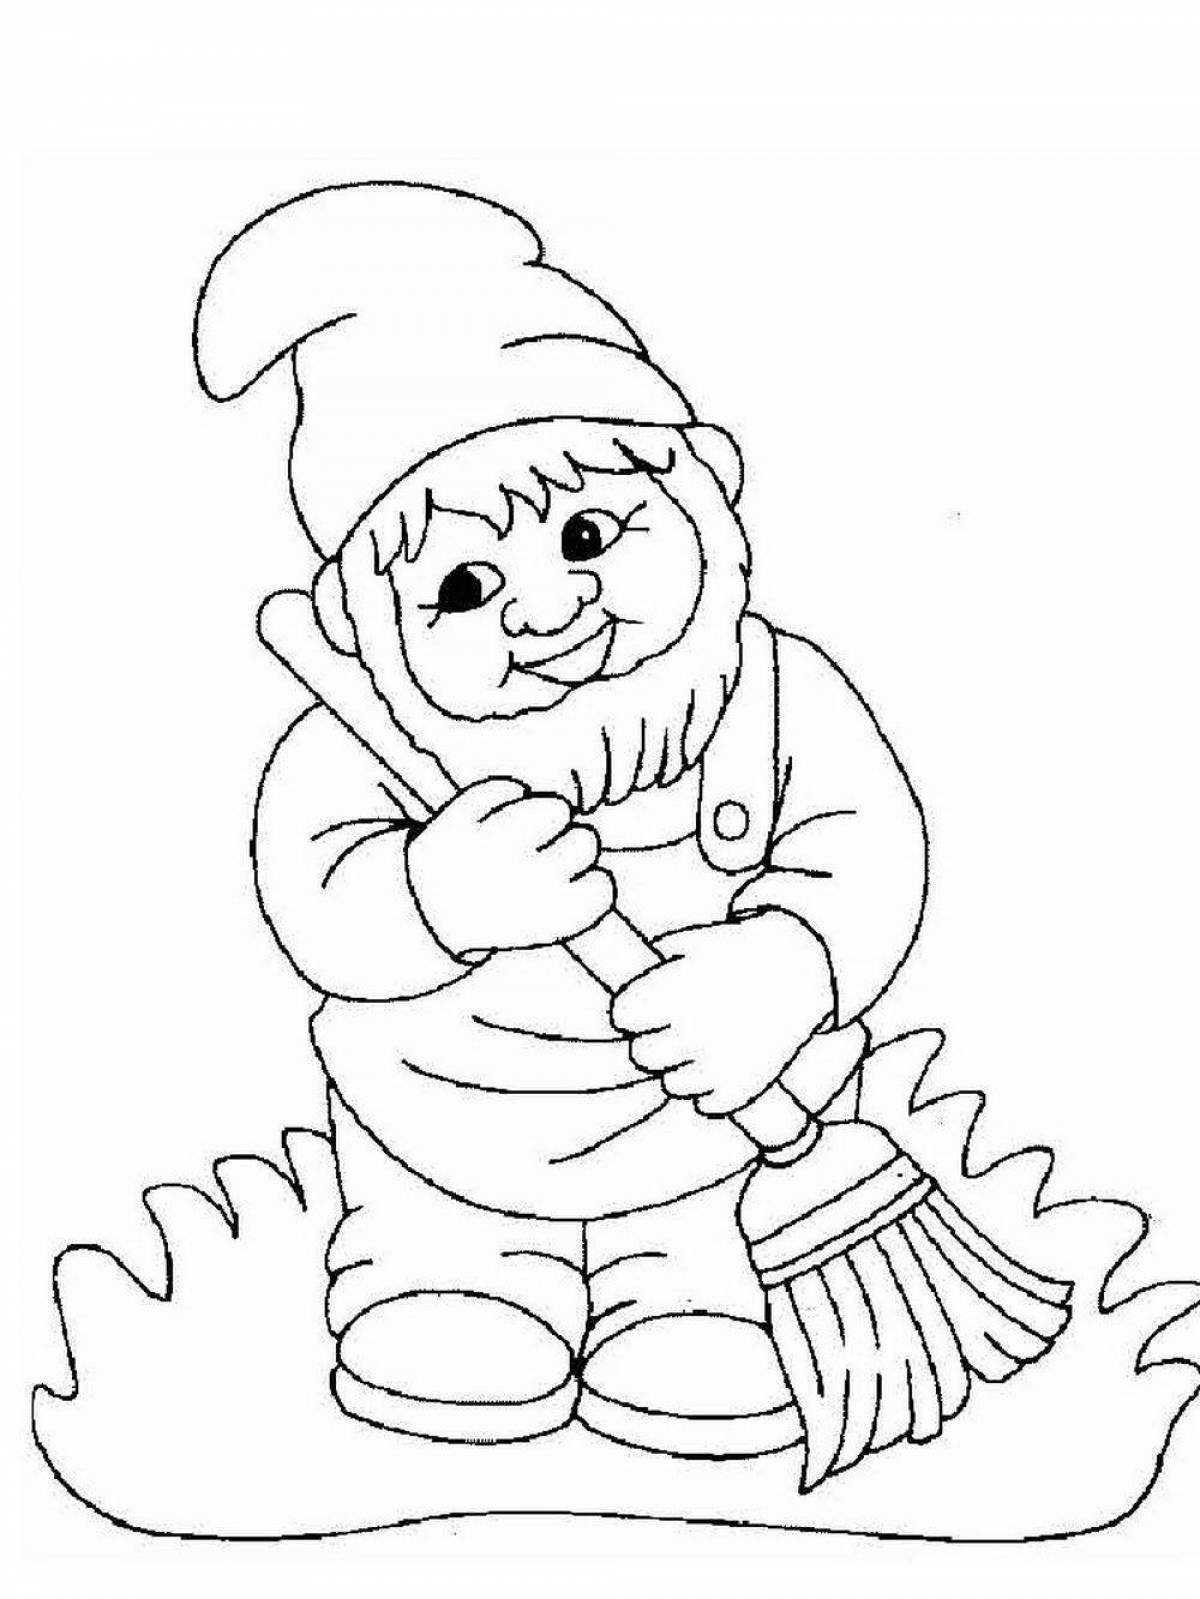 Colorful dwarf coloring pages